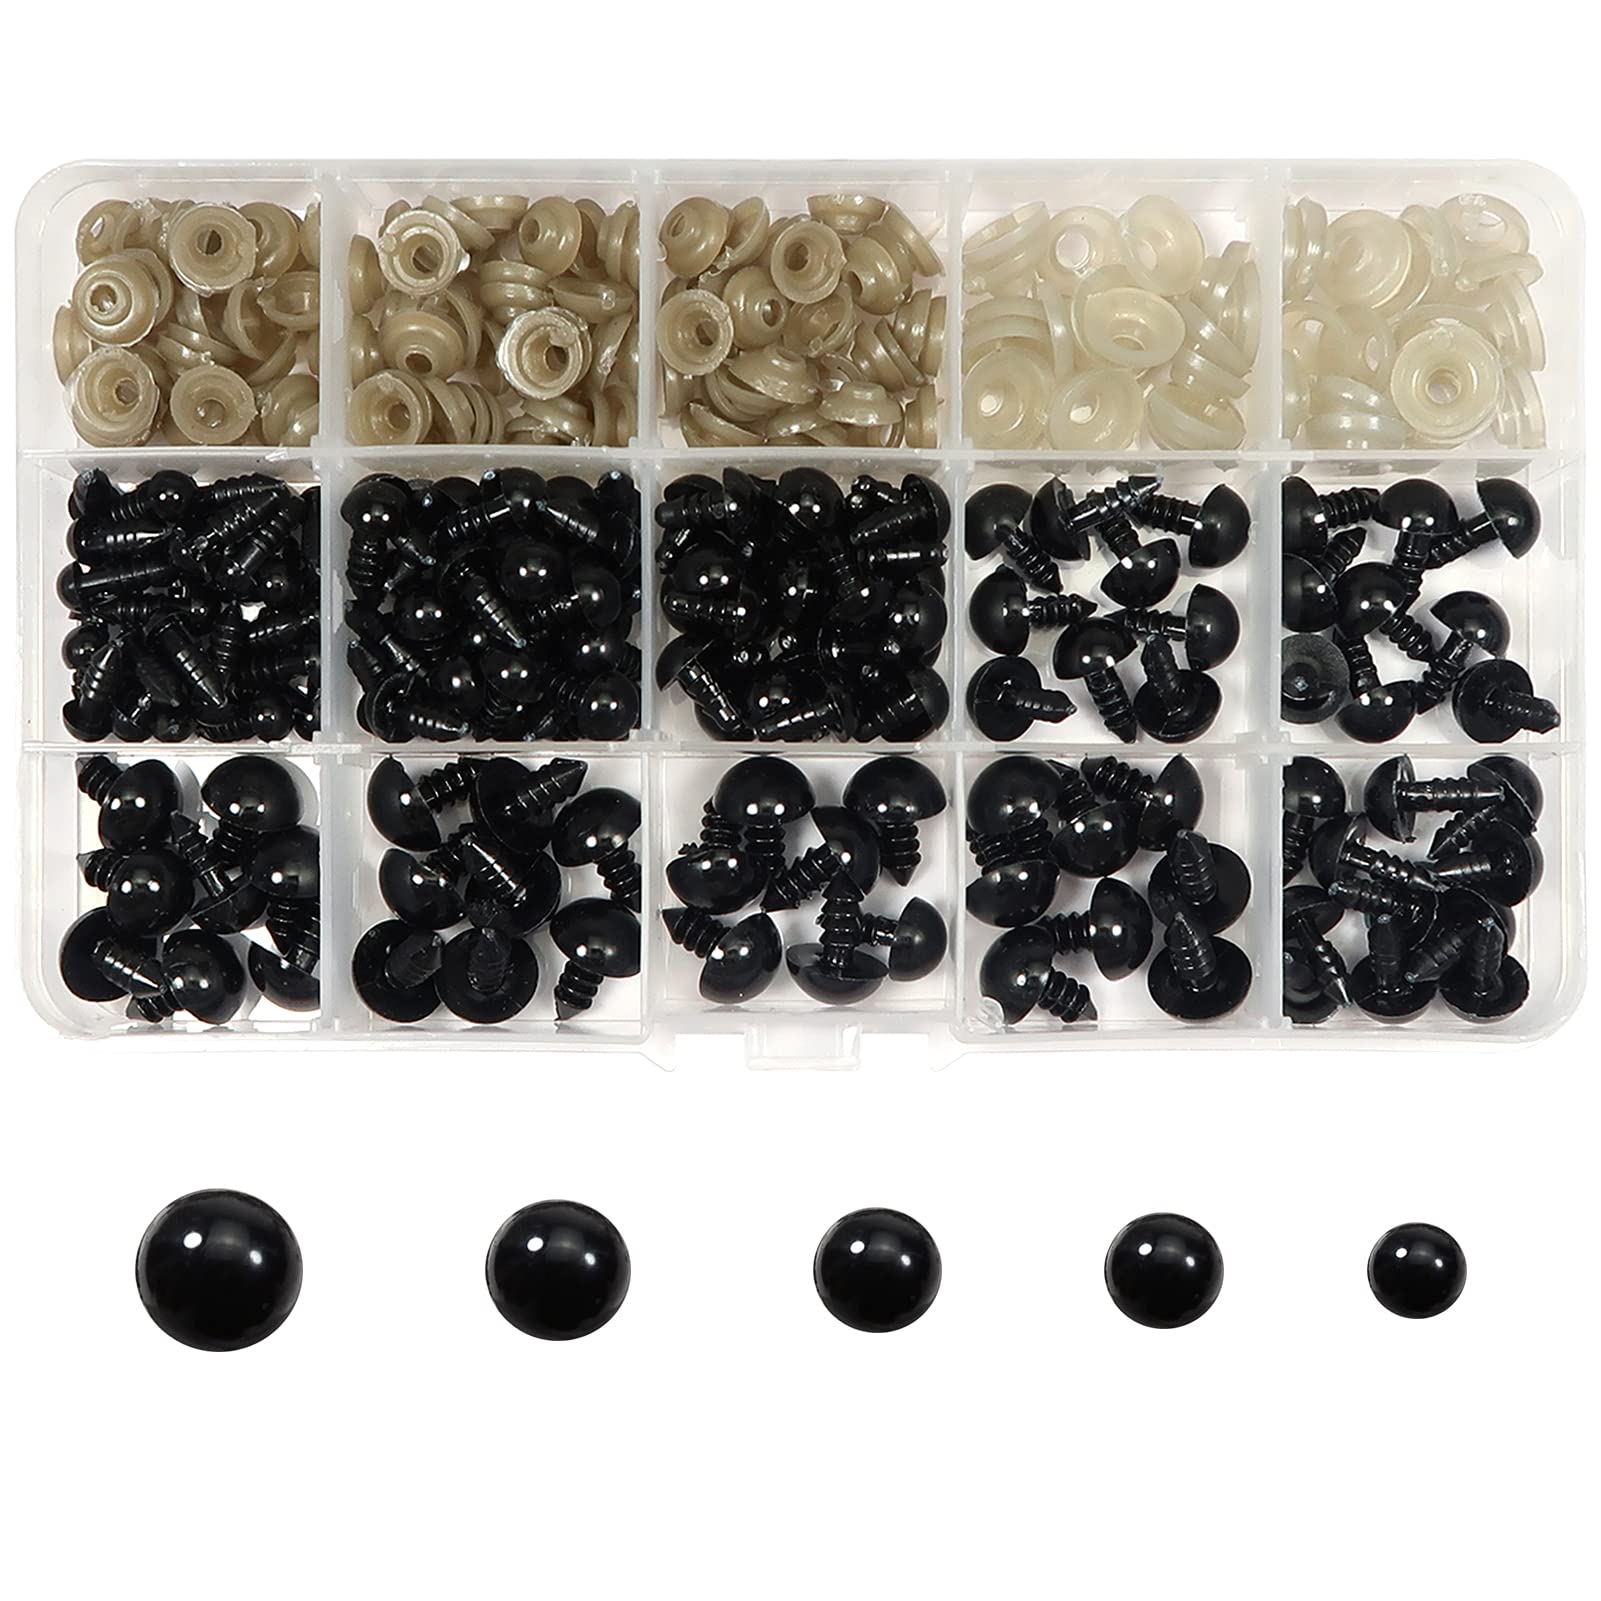 PLASTIC 12MM SAFETY Eyes for Stuffed Toys Crochet Projects Making